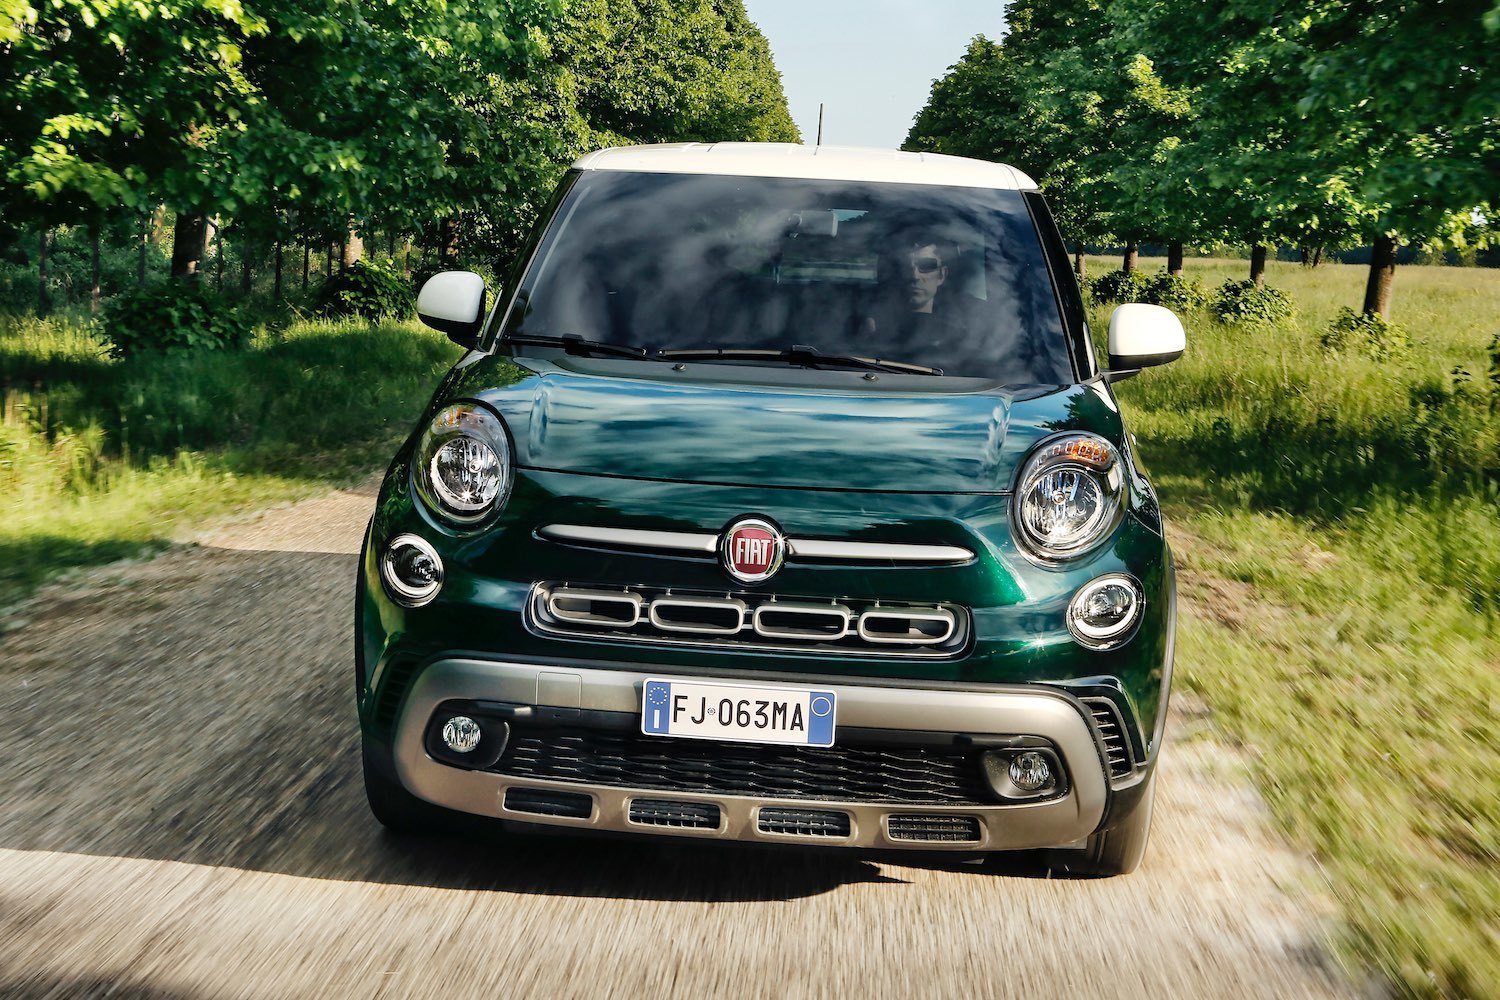 Tim Barnes-Clay reviews the New Fiat 500L from the first drive in Italy 13